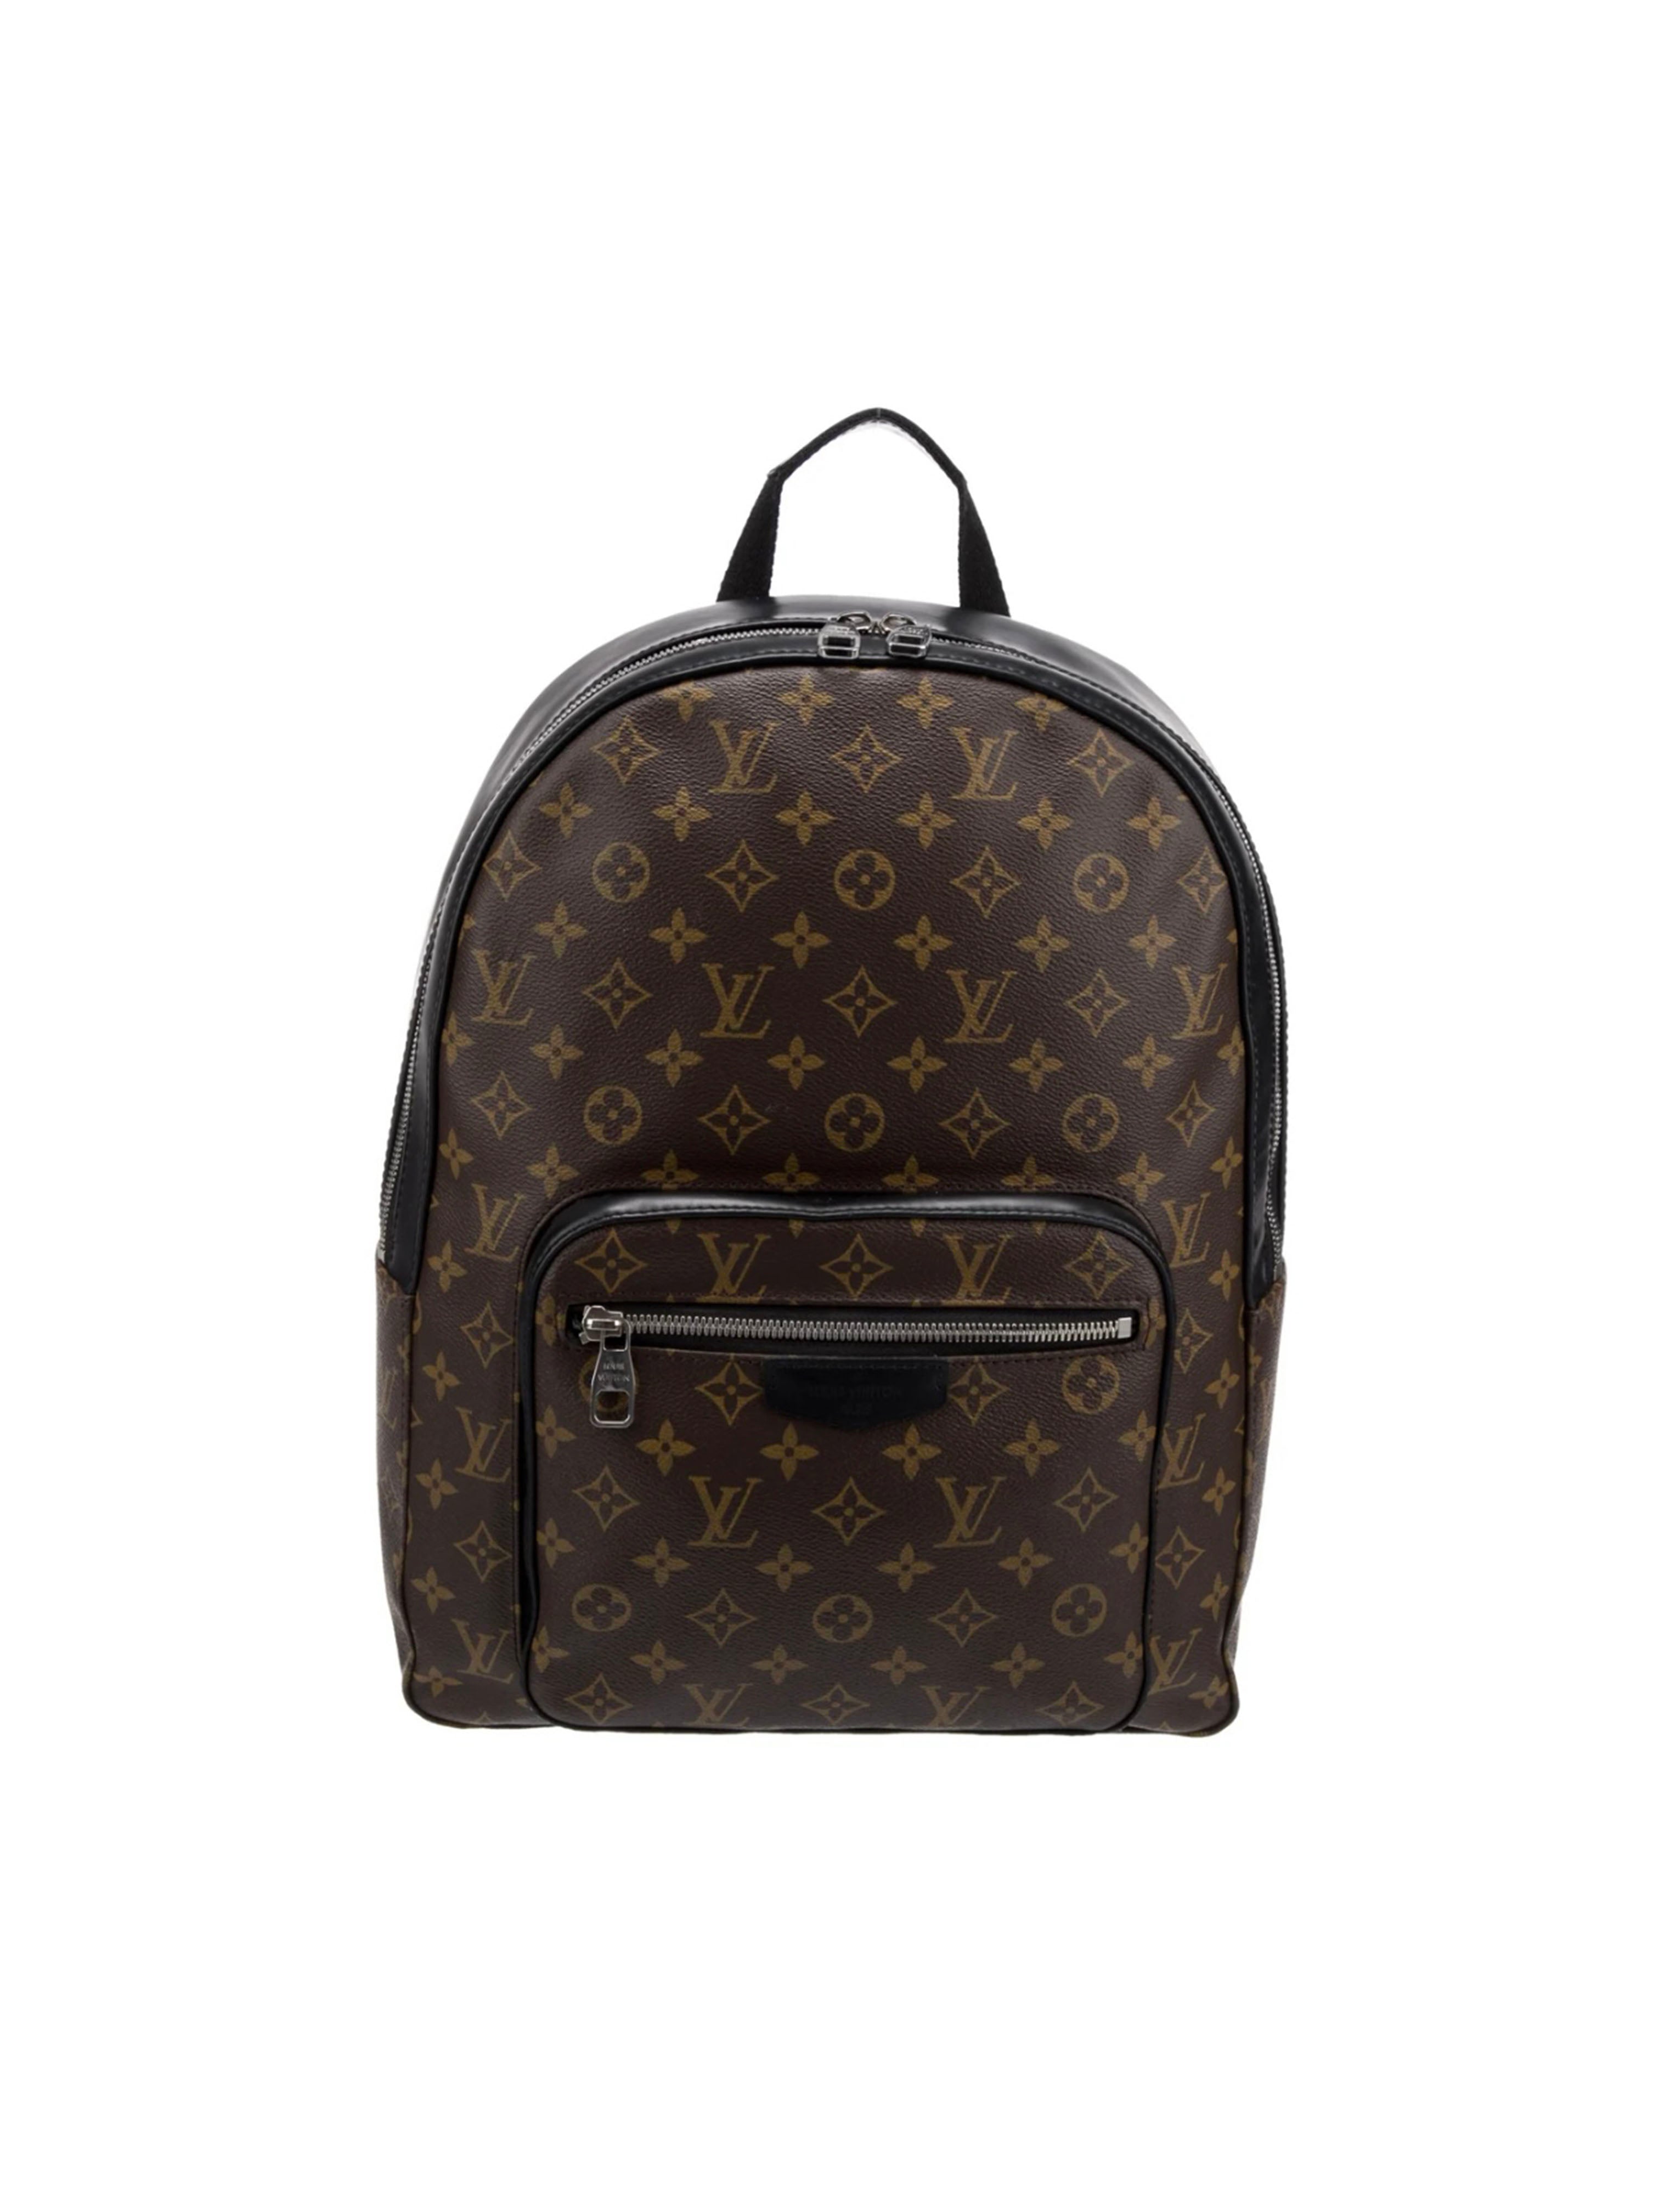 Monogram Coated Canvas/ Accent Black Leather Josh Backpack w/SHW-PENDING